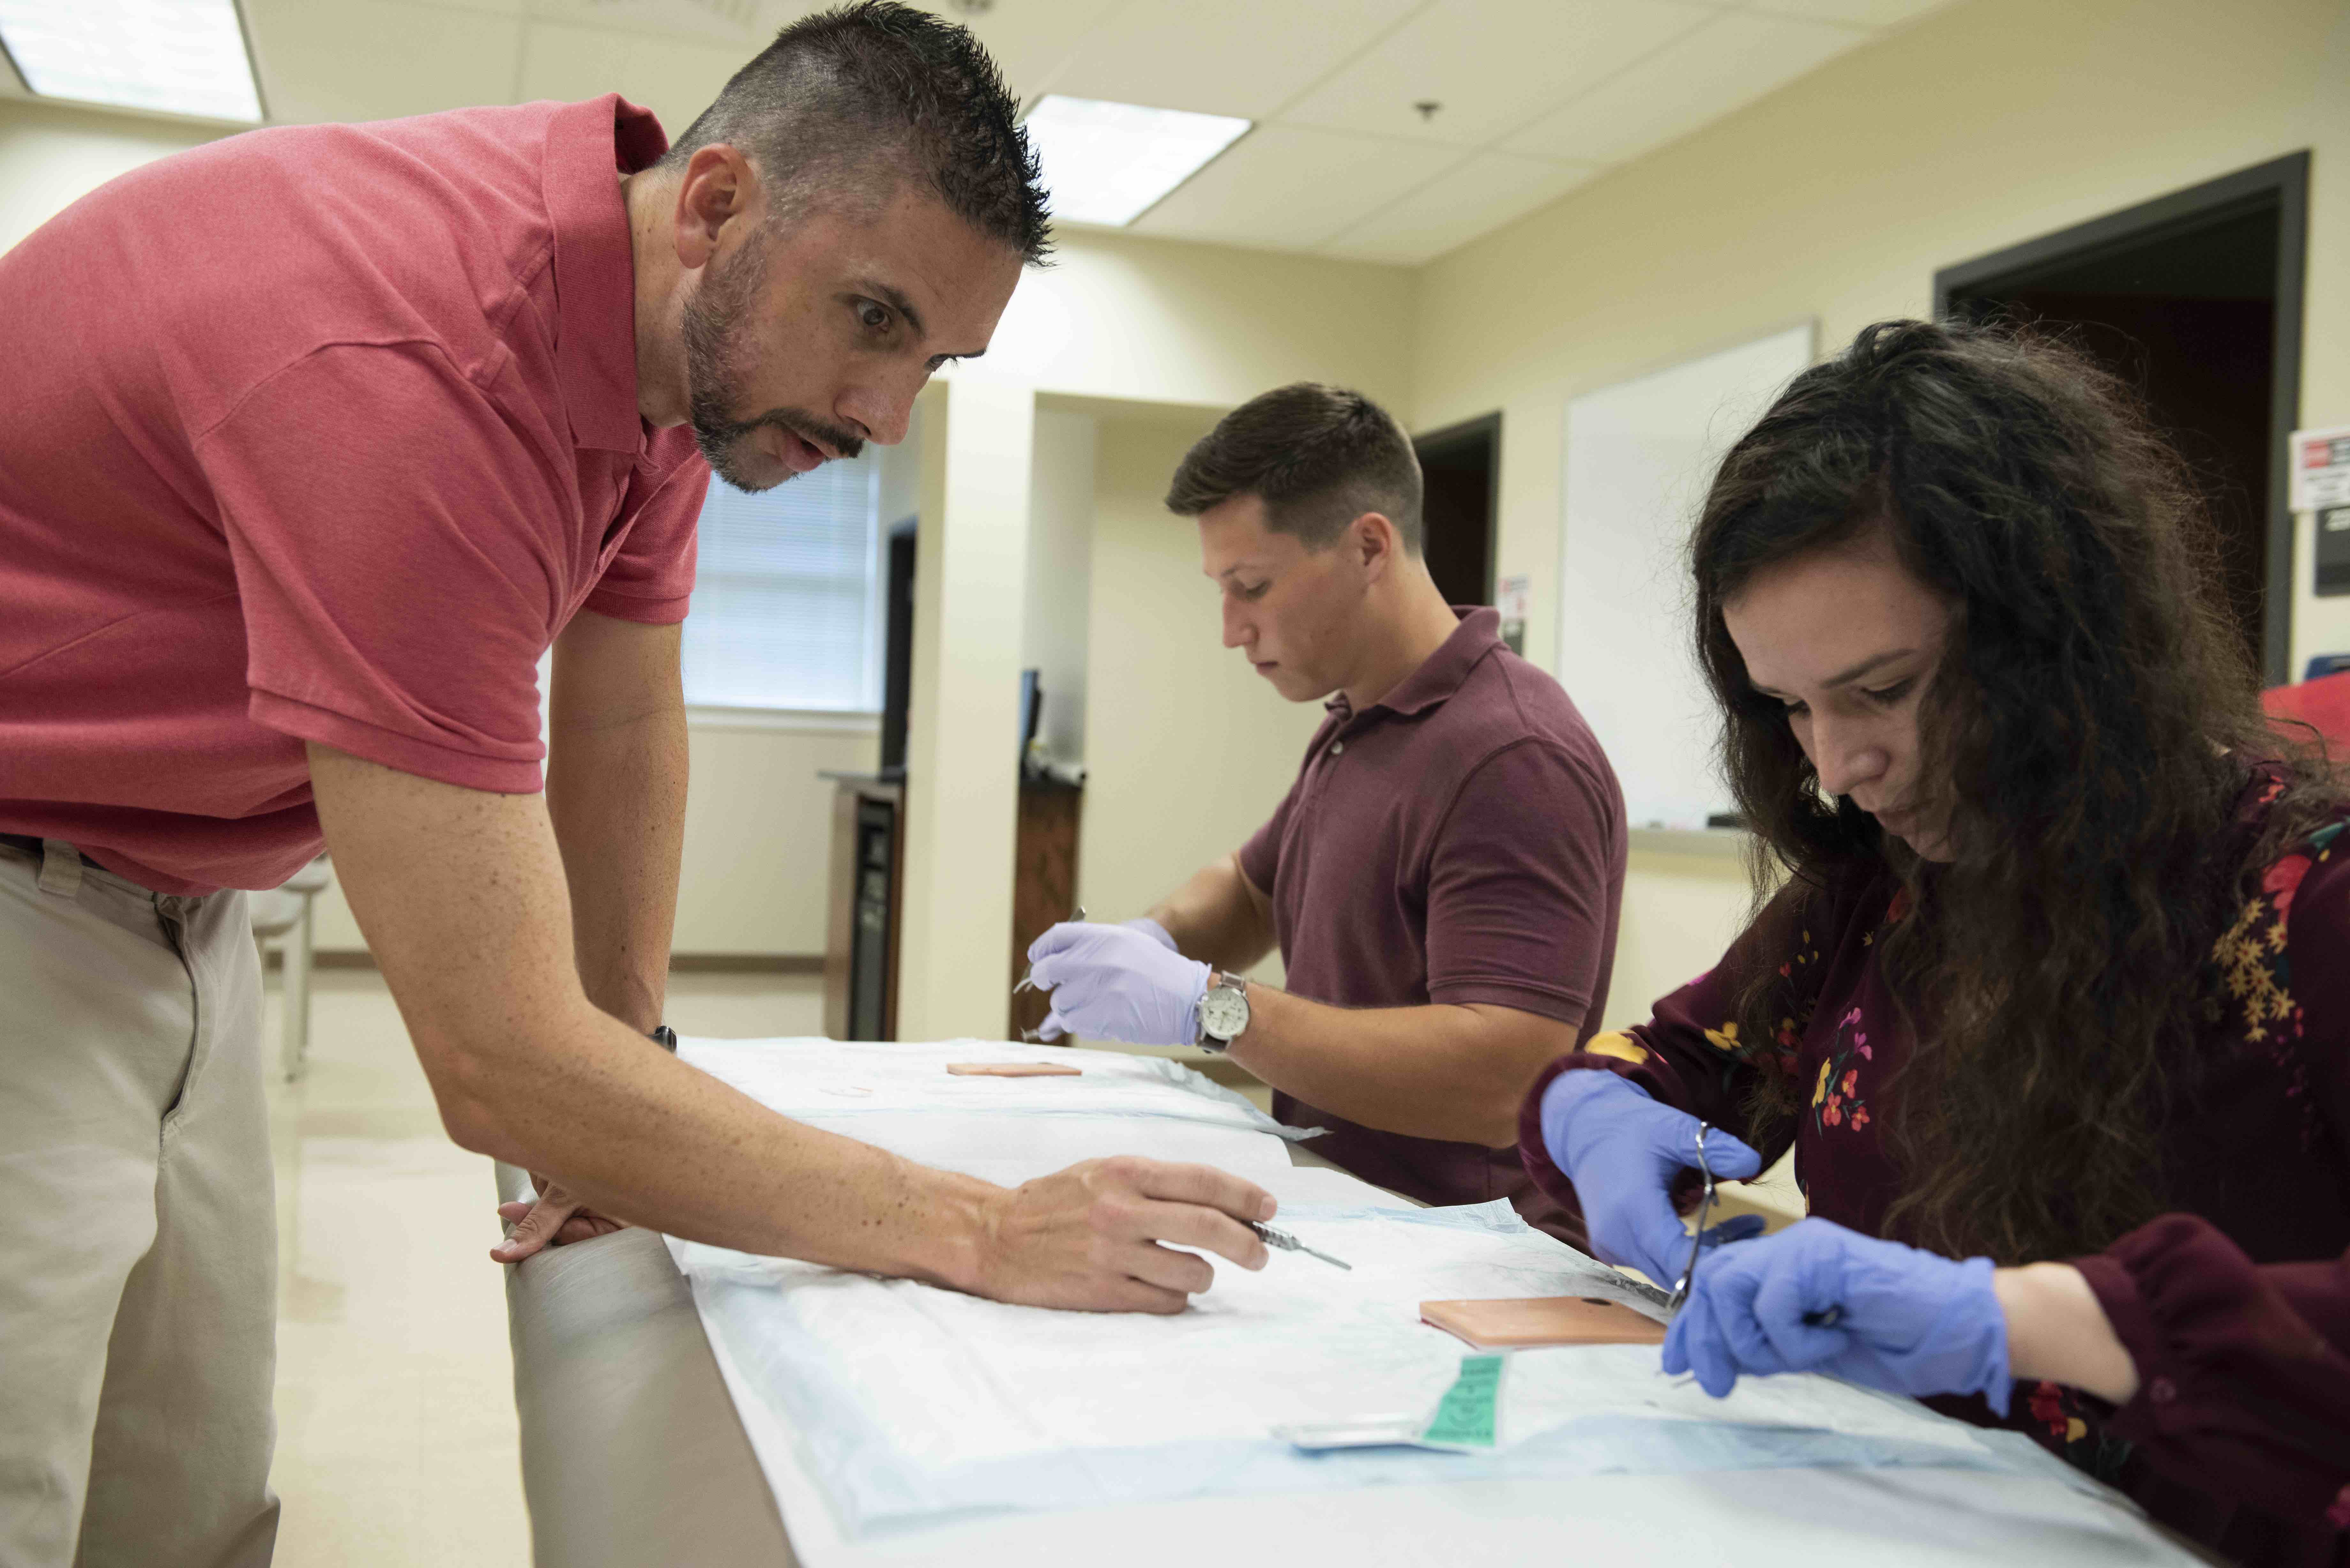 Assistant Professor of Physician Assistant Studies Shaun Lynch works with students on suturing procedure.